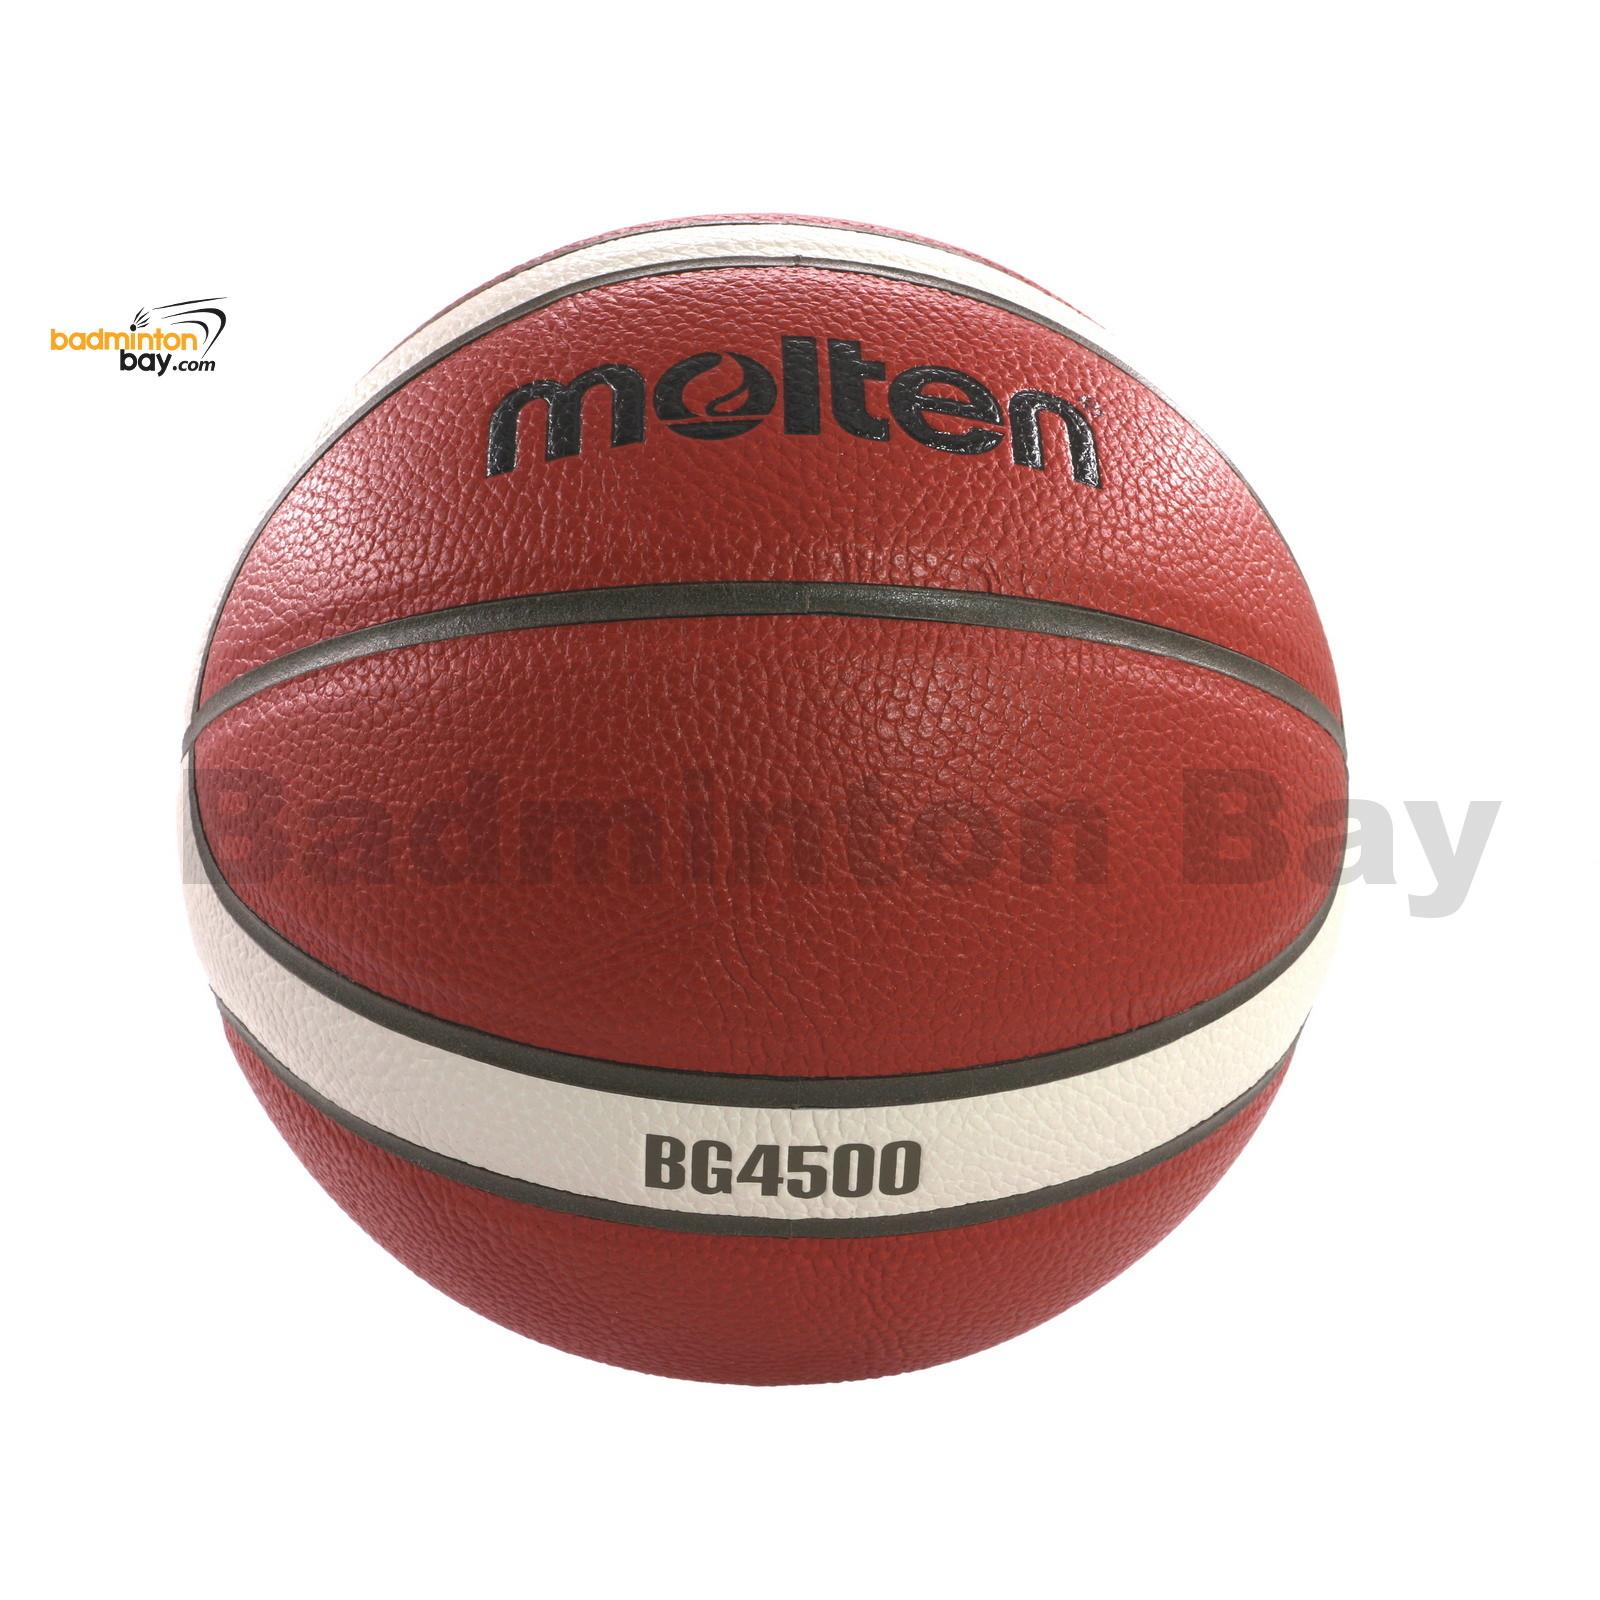 Details about   New 100% Genuine Molten BG4500 formally GG7X Composite Leather Basketball 